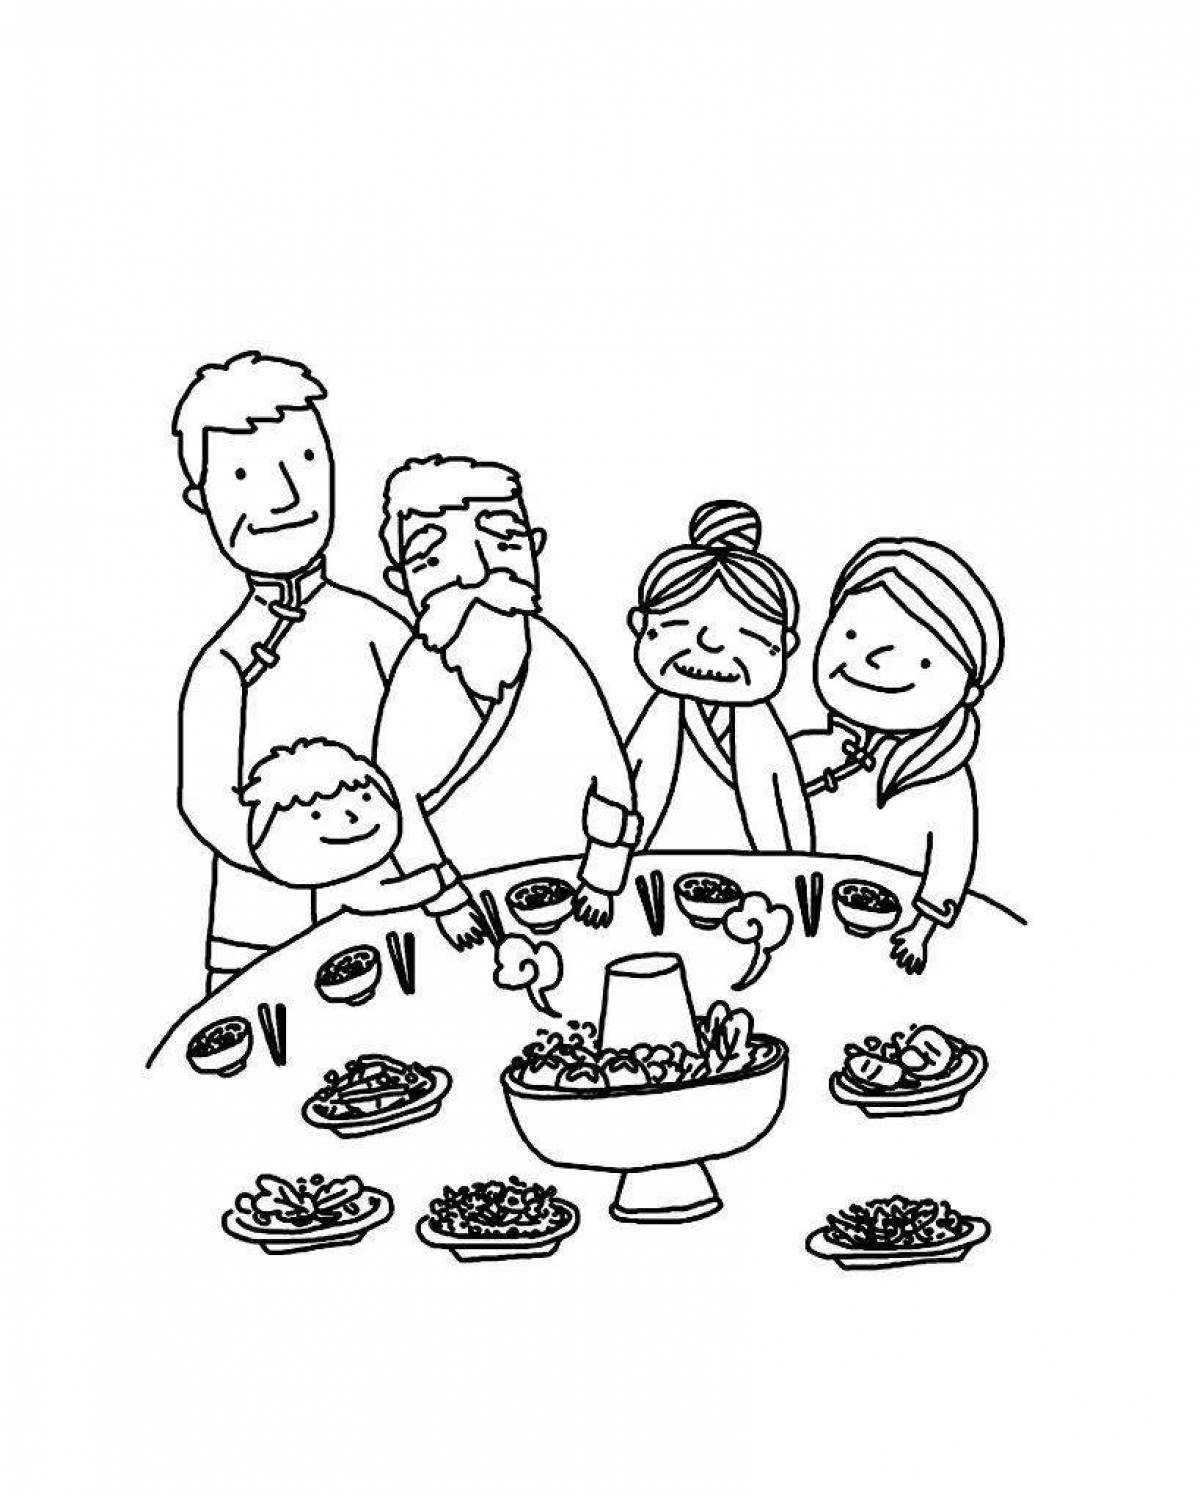 Coloring page excited family at the table